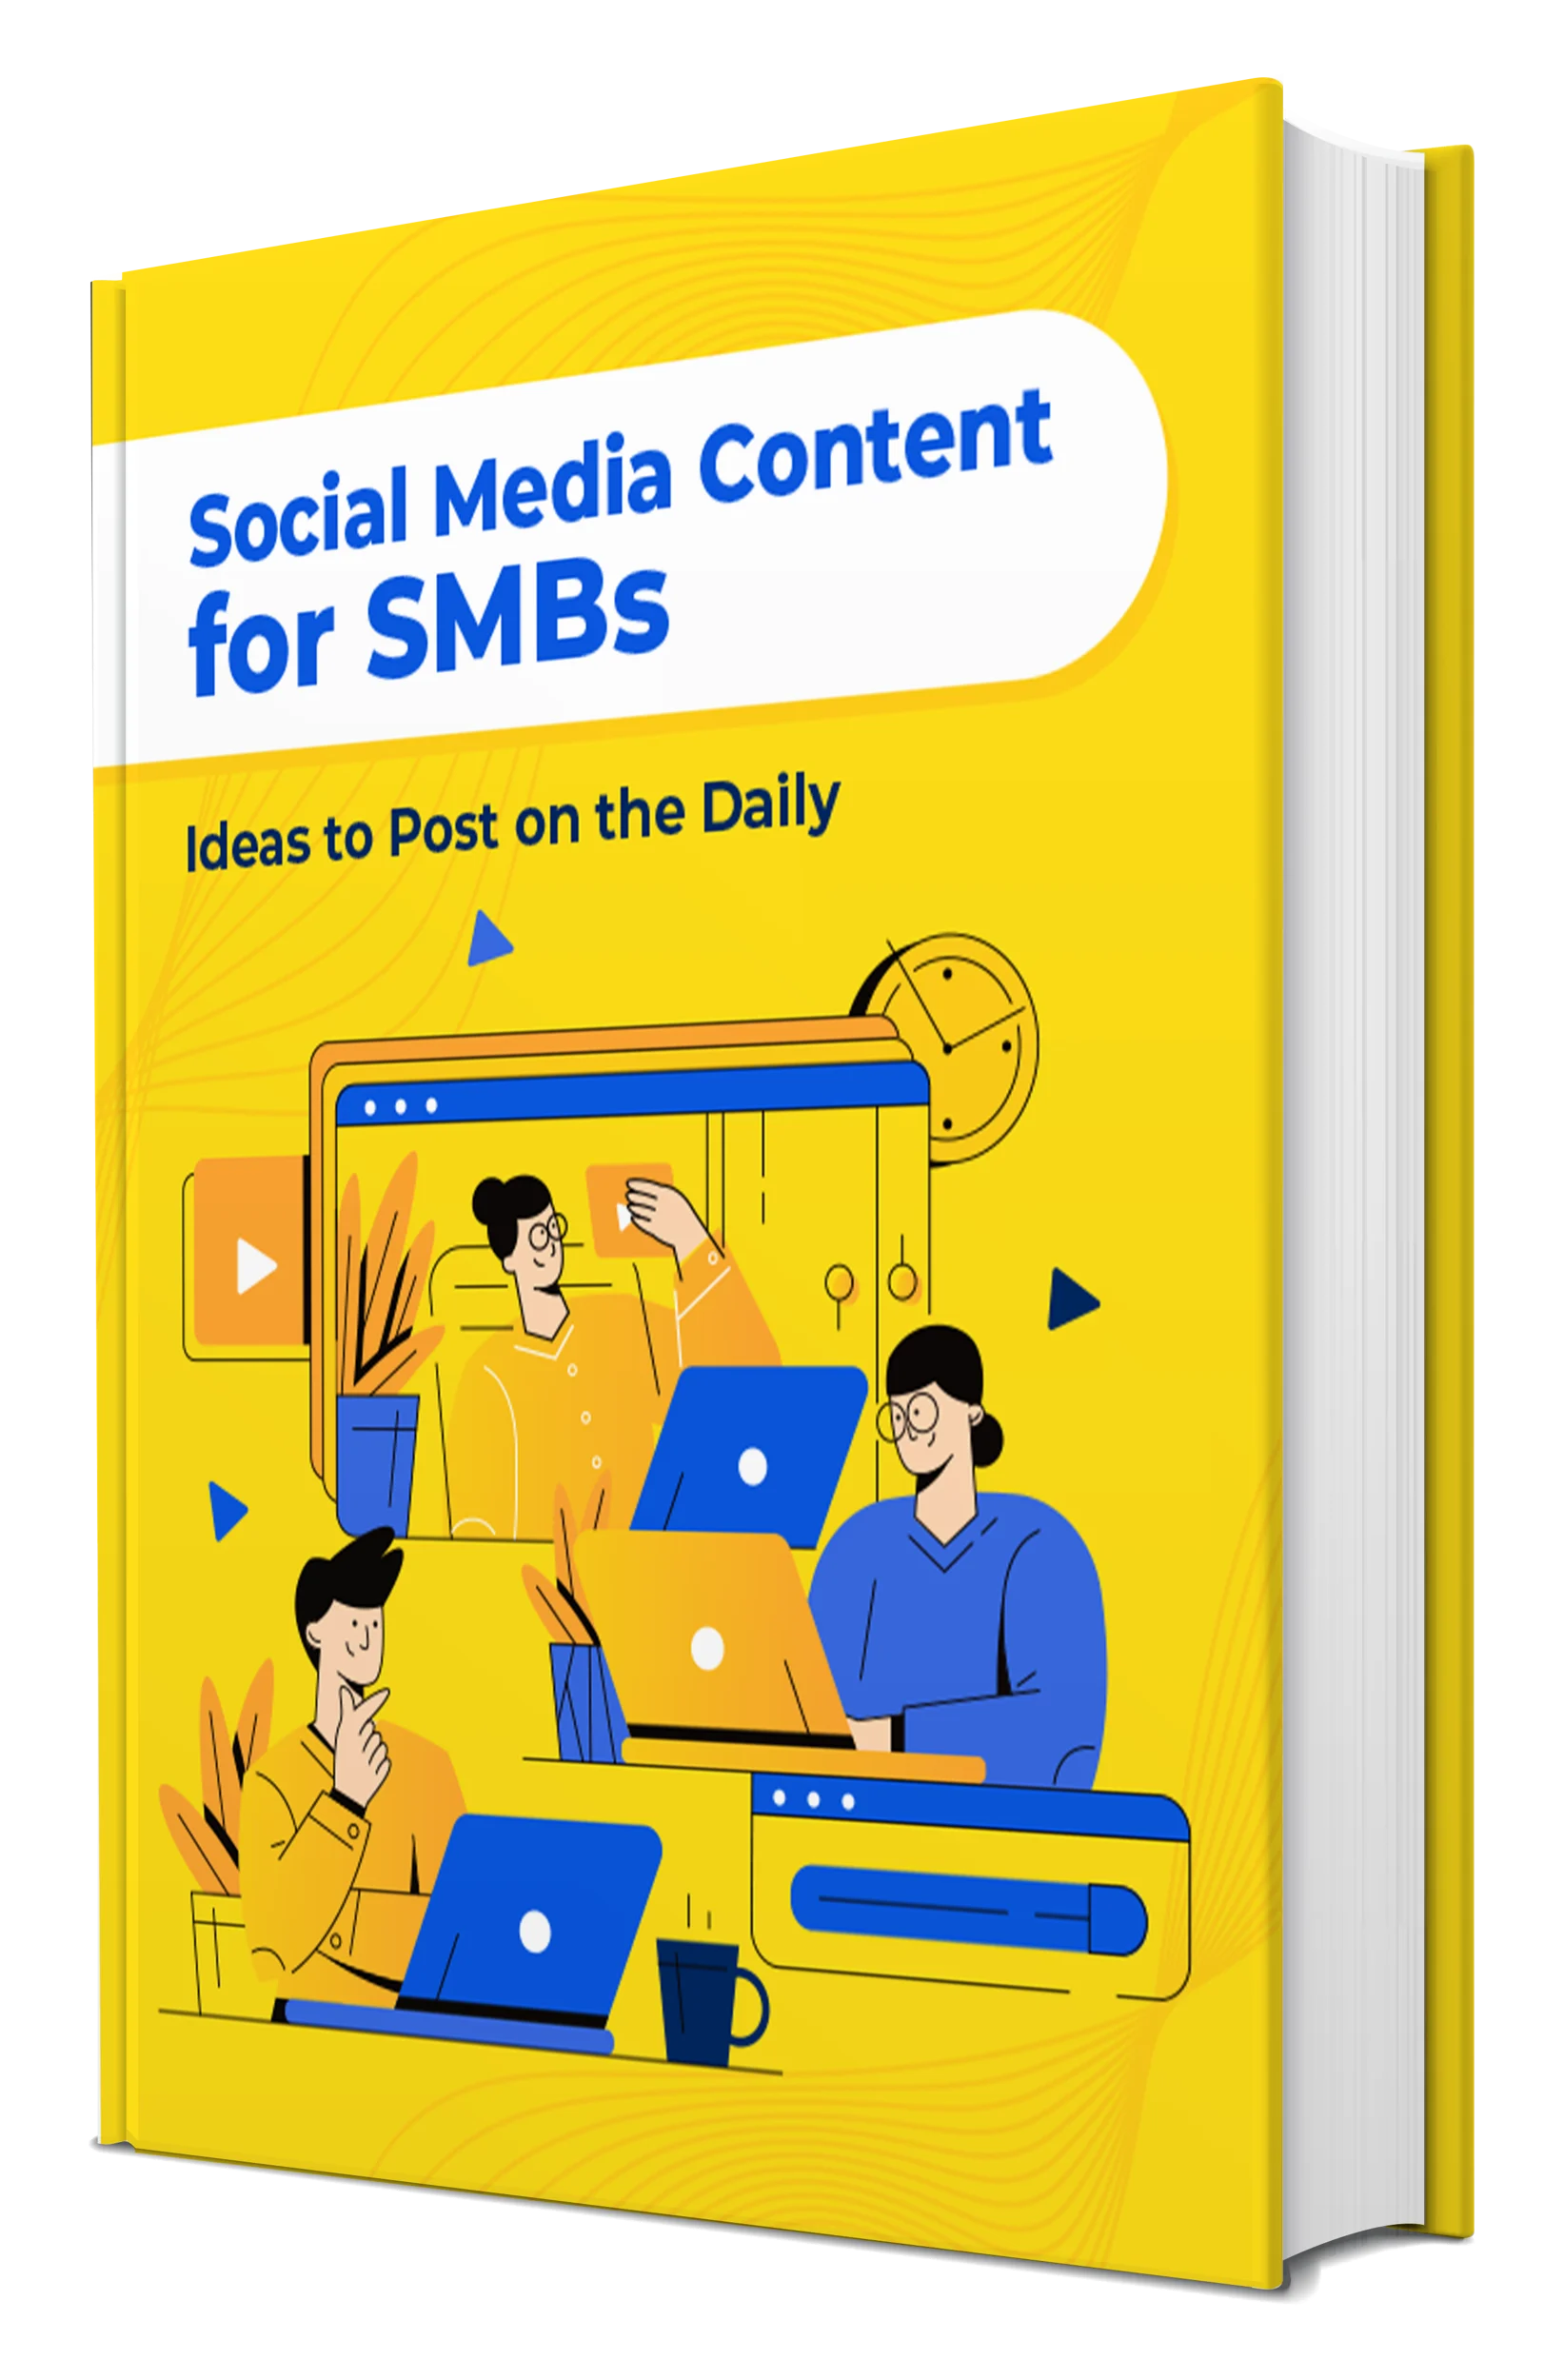 365 Days of Social Media Content for SMBs